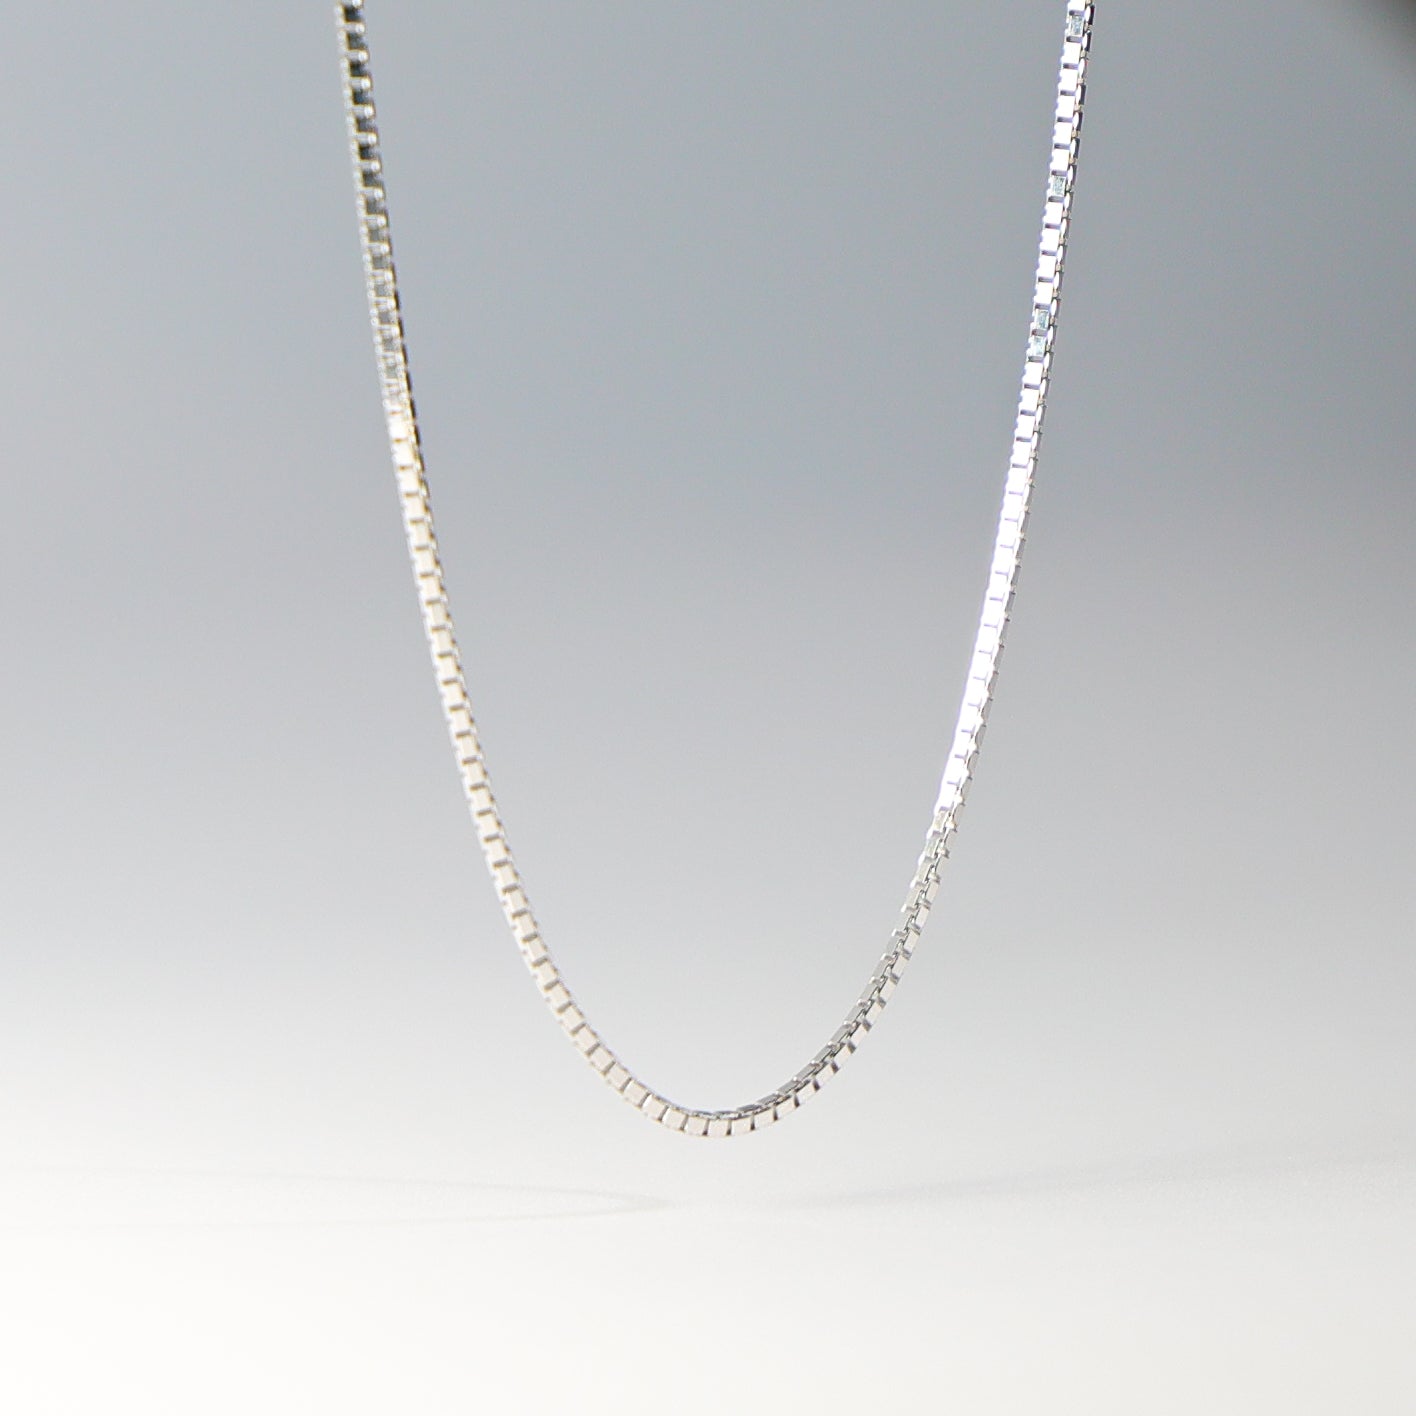 1mm 14K Solid White Gold Box Chain Model-0259 - Charlie & Co. Jewelry